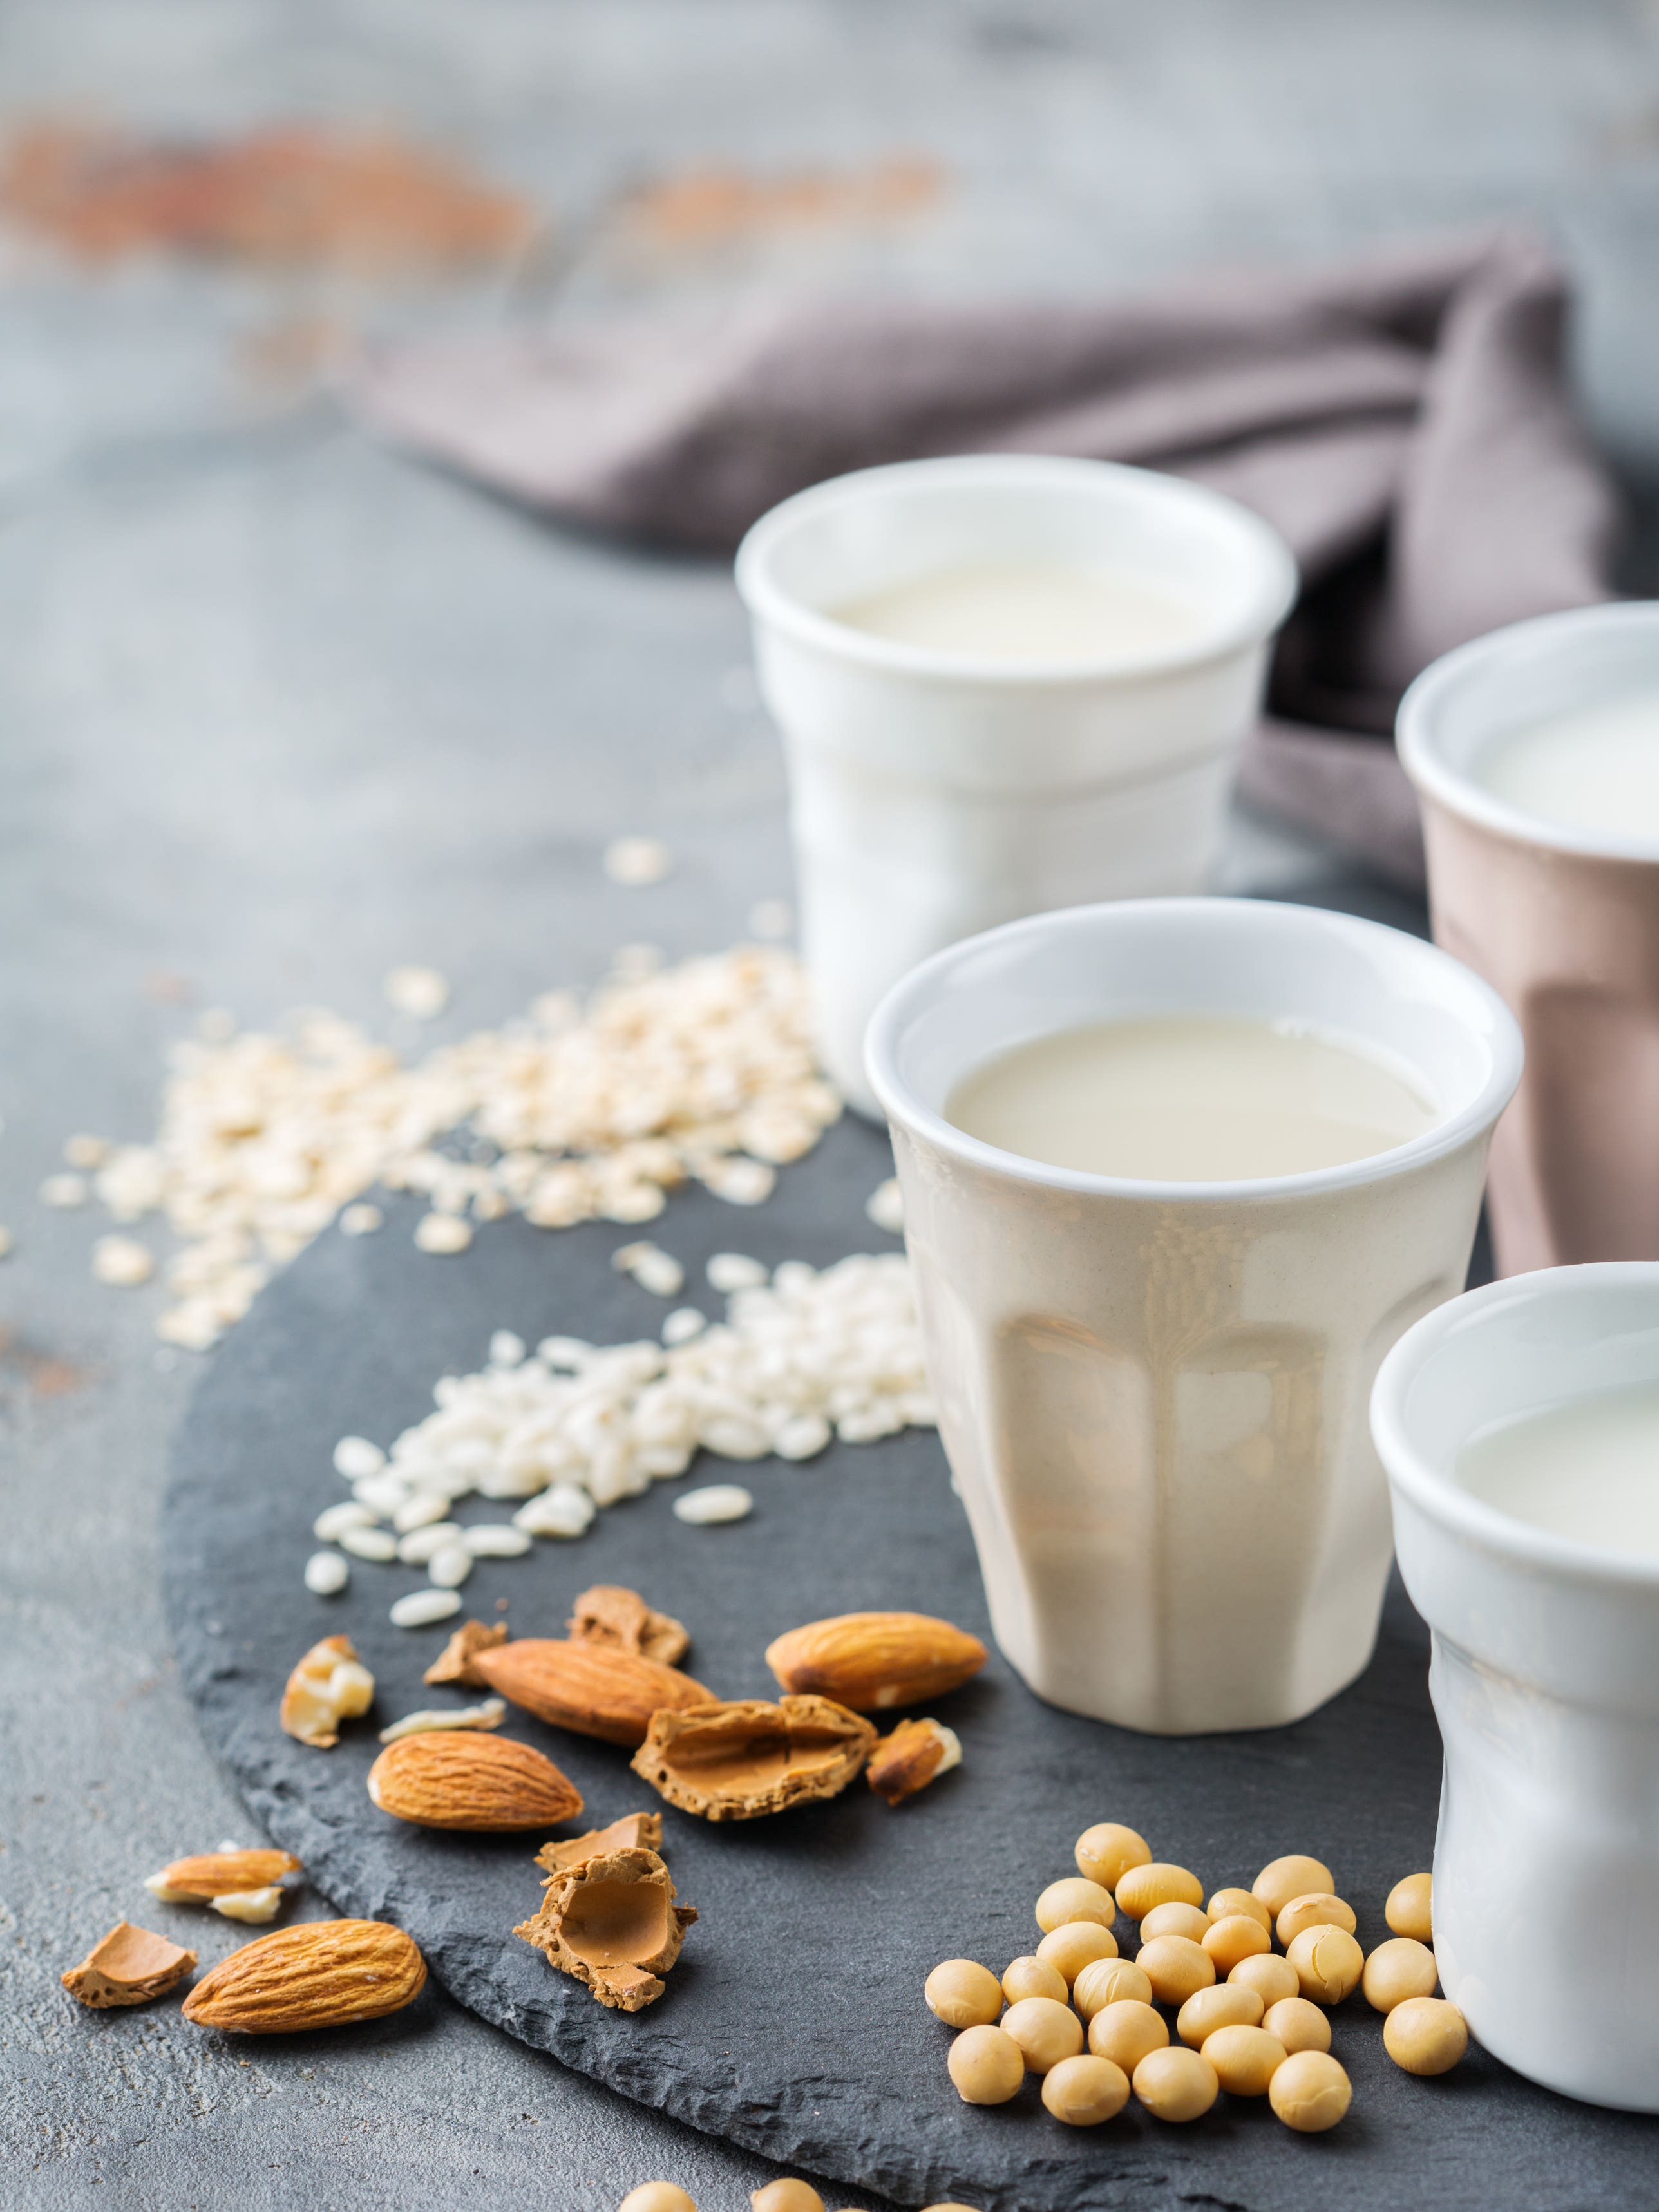 Forget Buying, Alternative Milks Are Super Easy To DIY